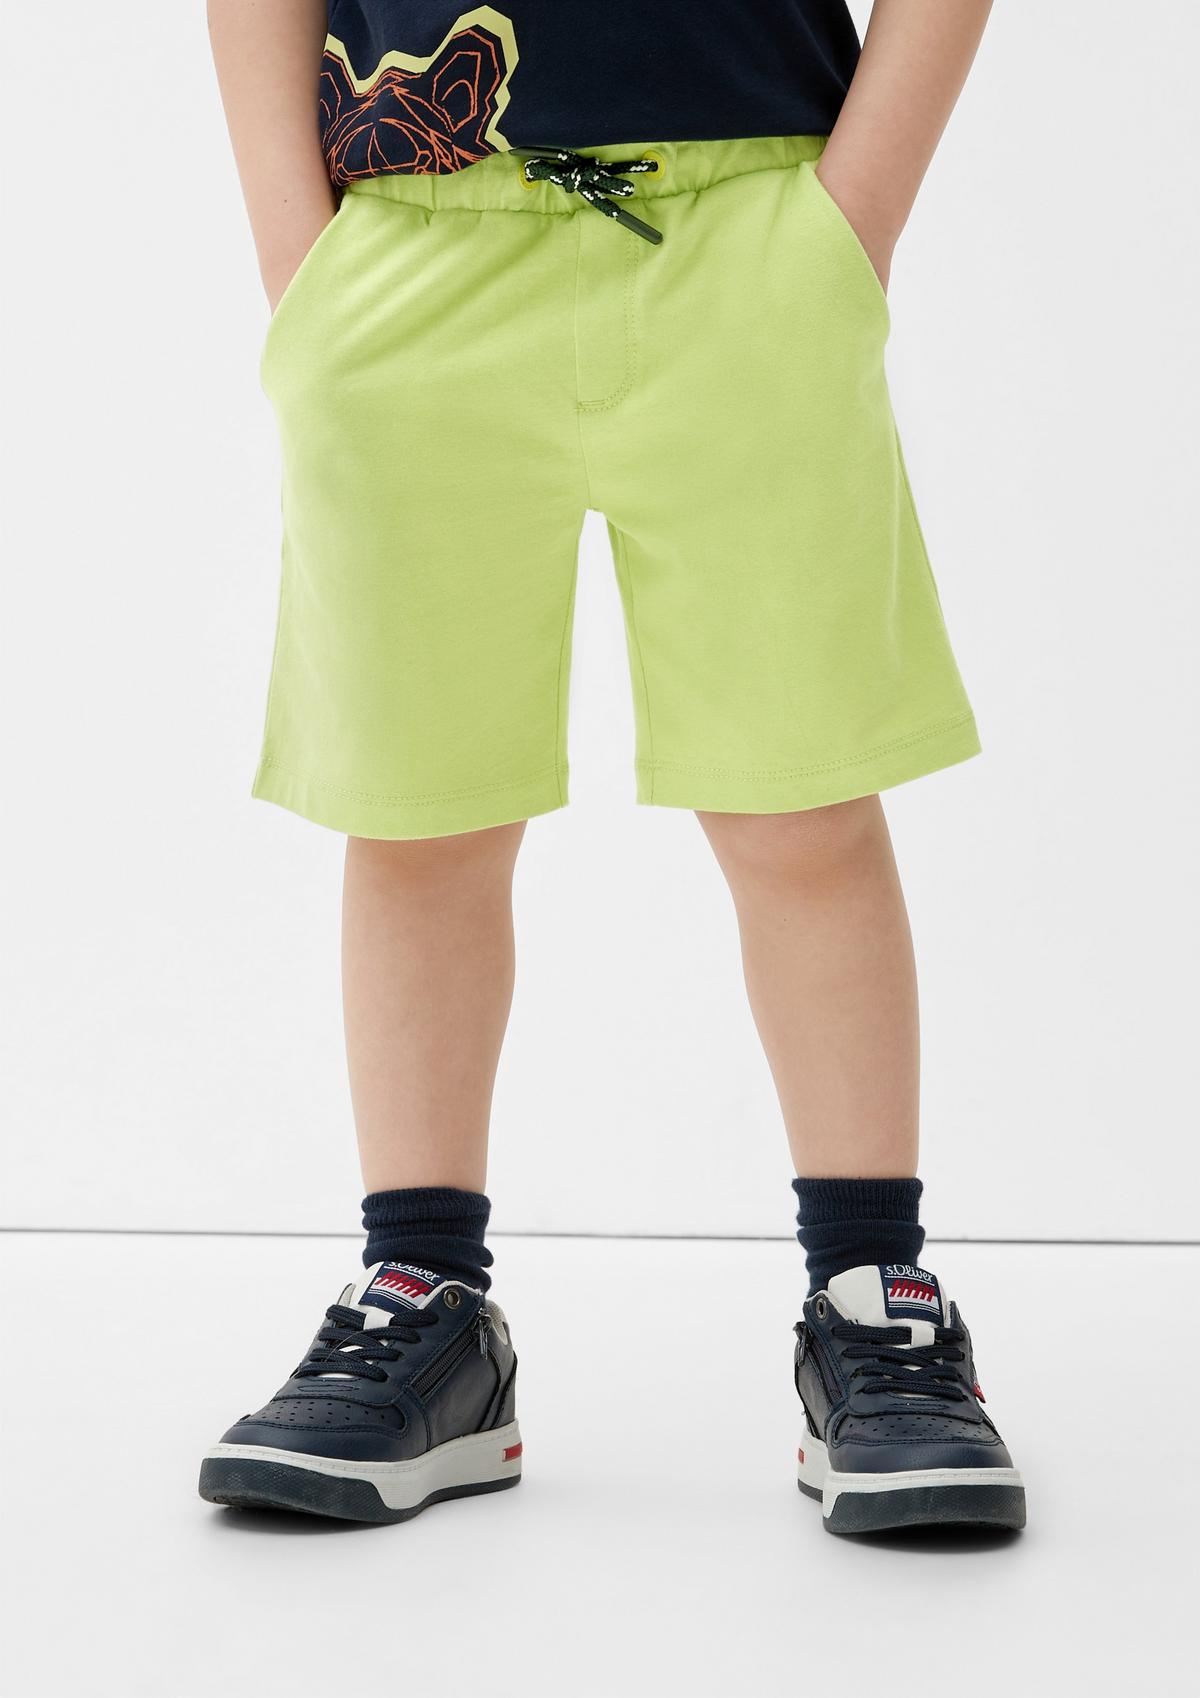 teens Bermuda online shorts and Find for boys